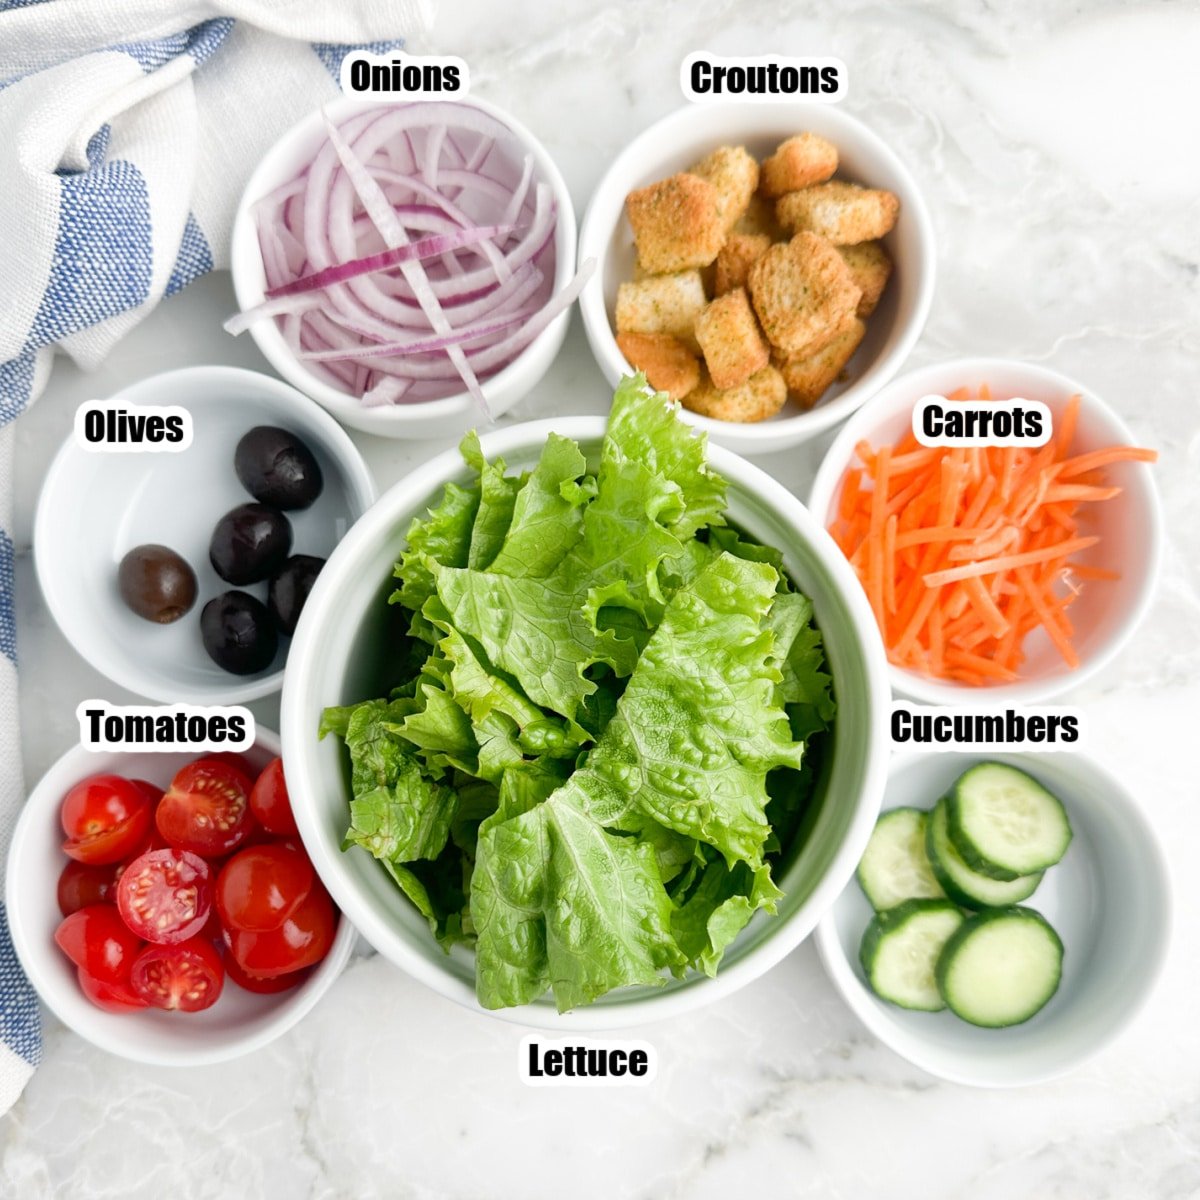 Bowl of lettuce, onions, croutons, carrots, cucumbers, tomatoes, and olives. 